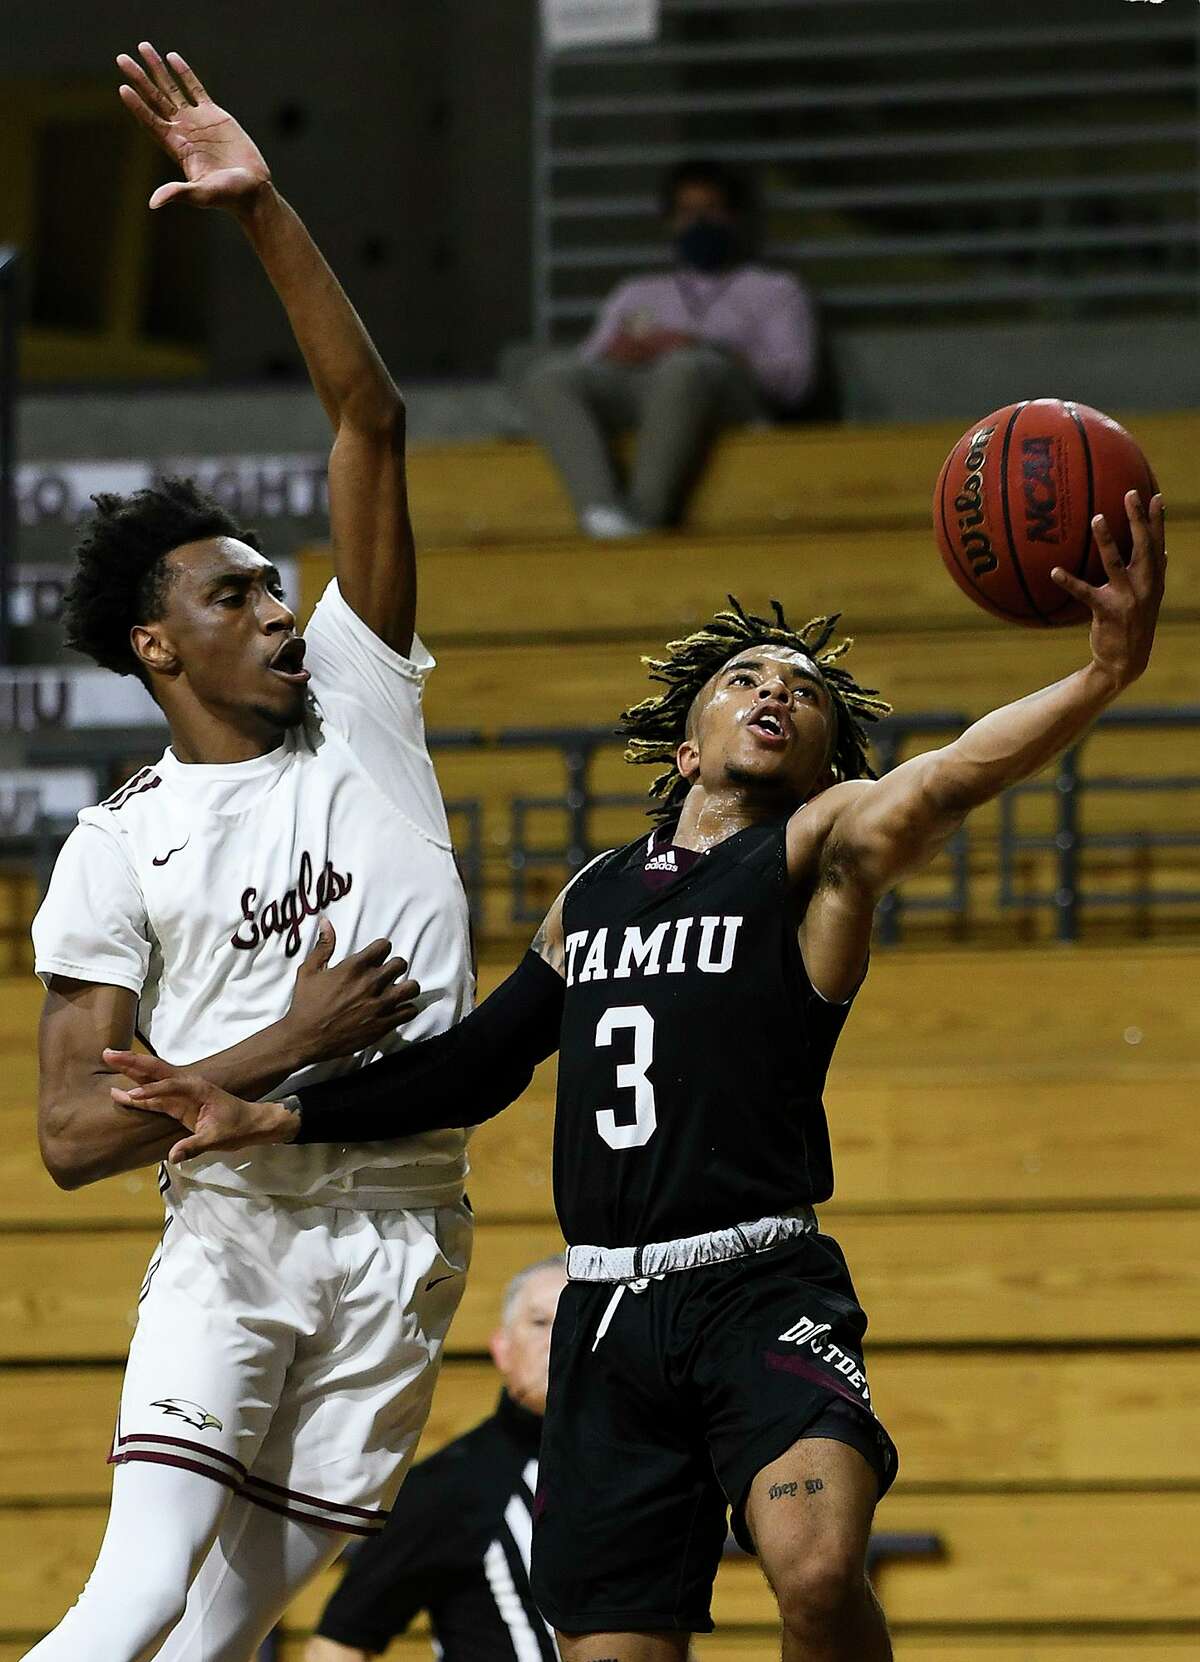 Anthony Scott scored 22 points as TAMIU fell to Oklahoma Christian 79-70 in overtime Tuesday.